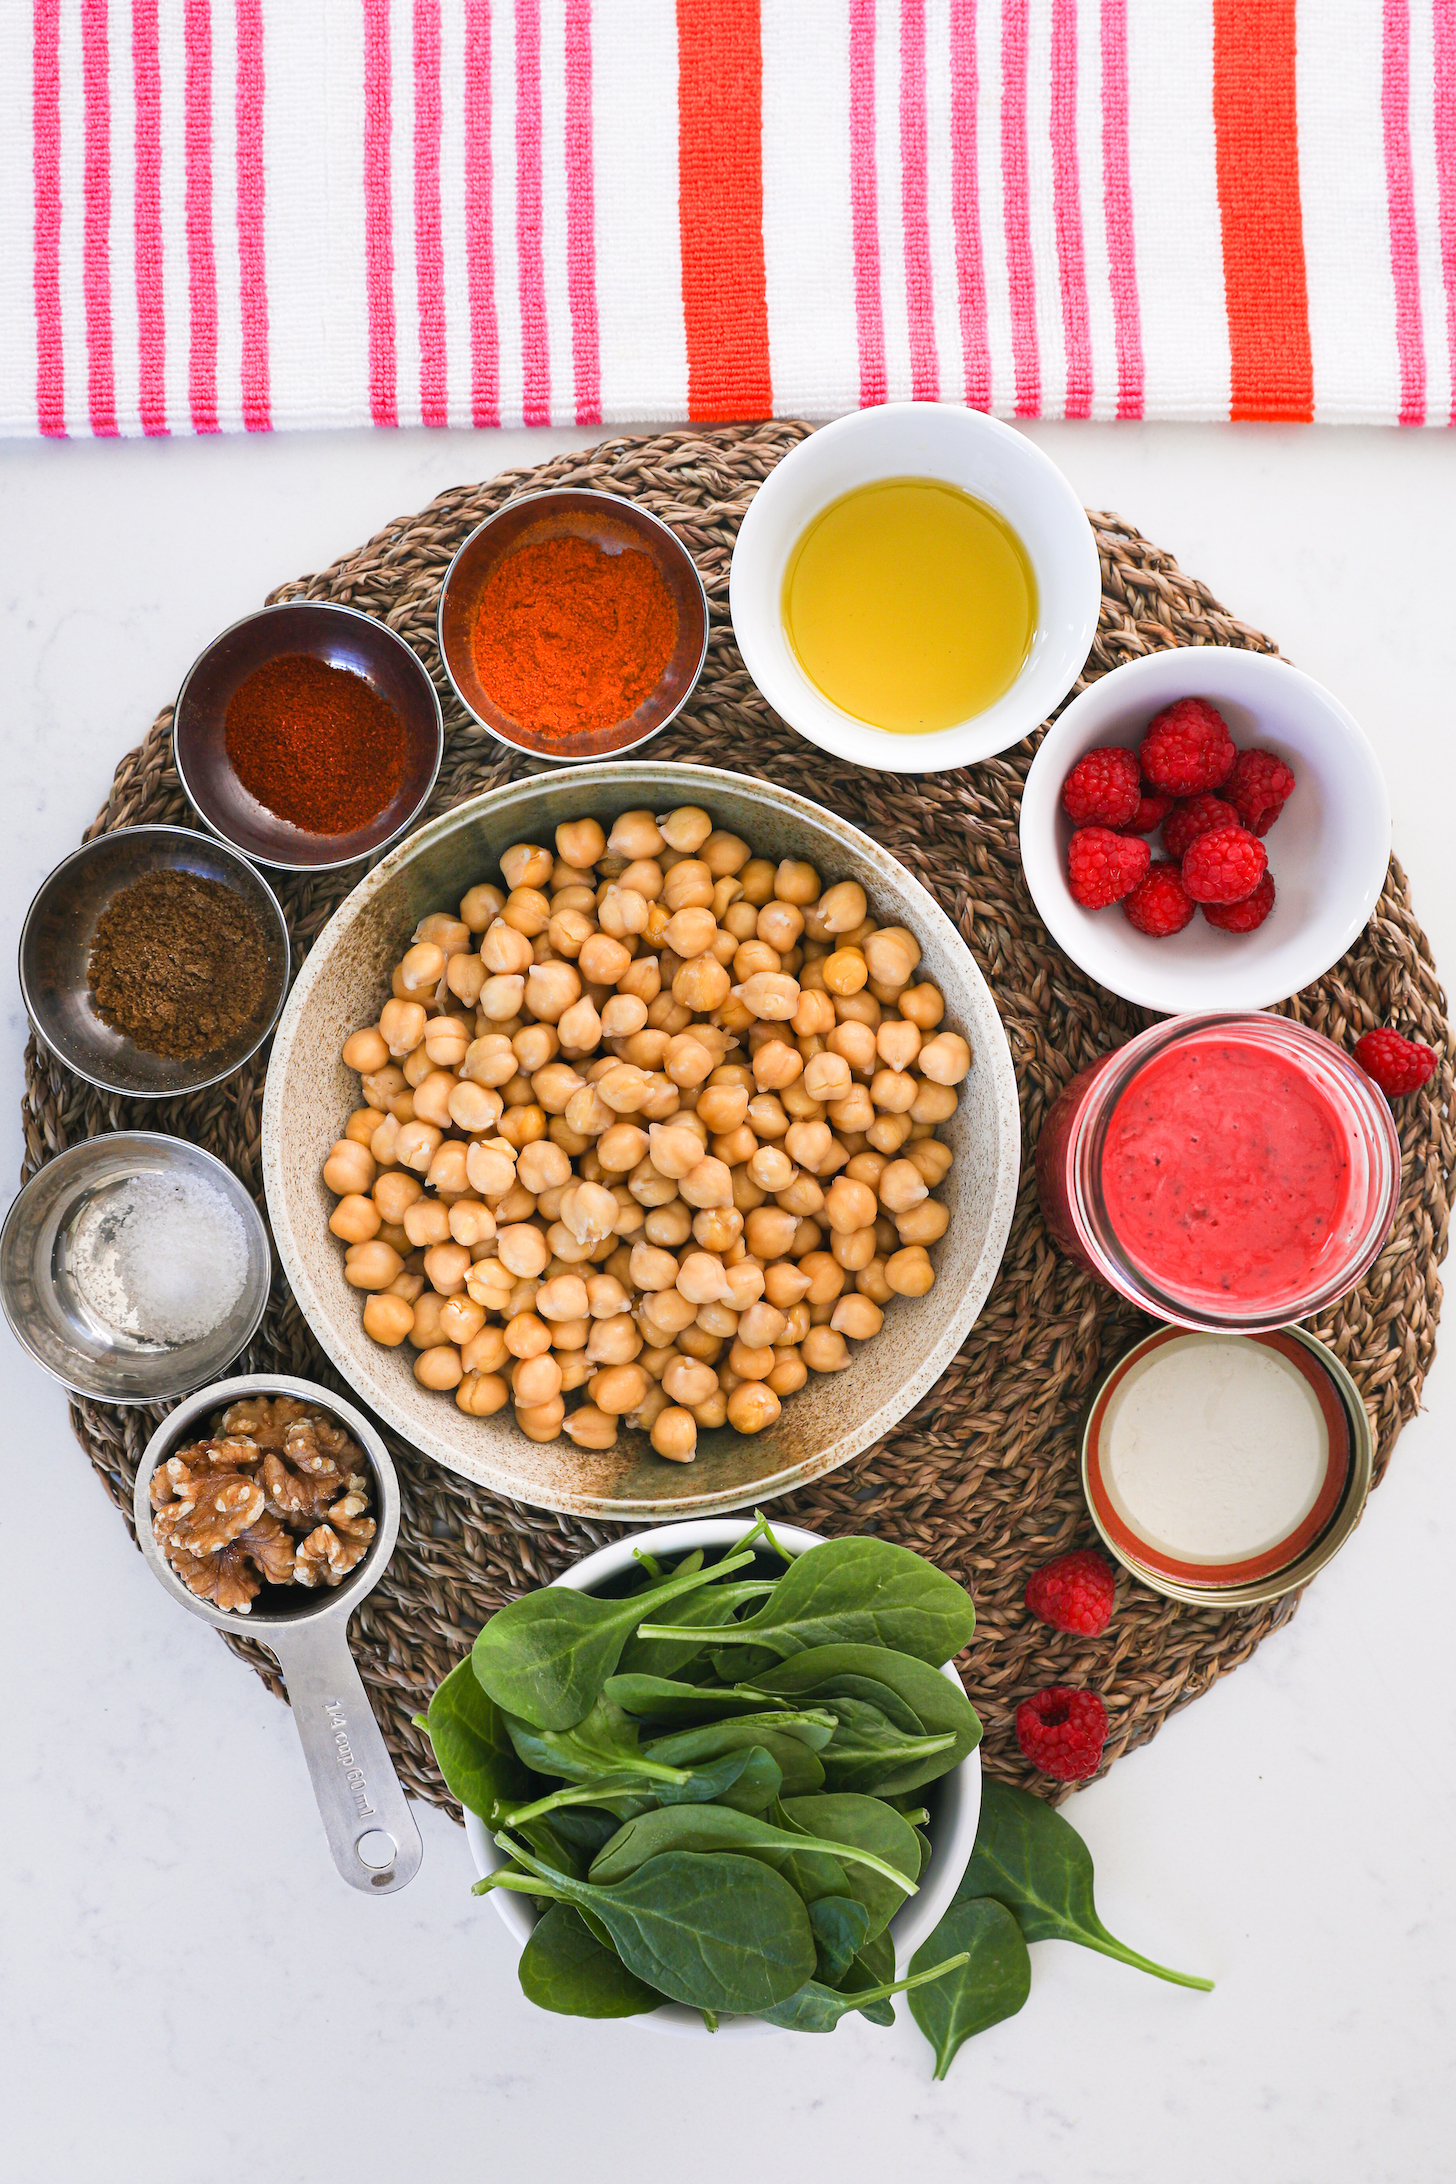 A coloourful display of food ingredients inlcuding chickpeas, spices, spinach and a red sauce on a straw mat.